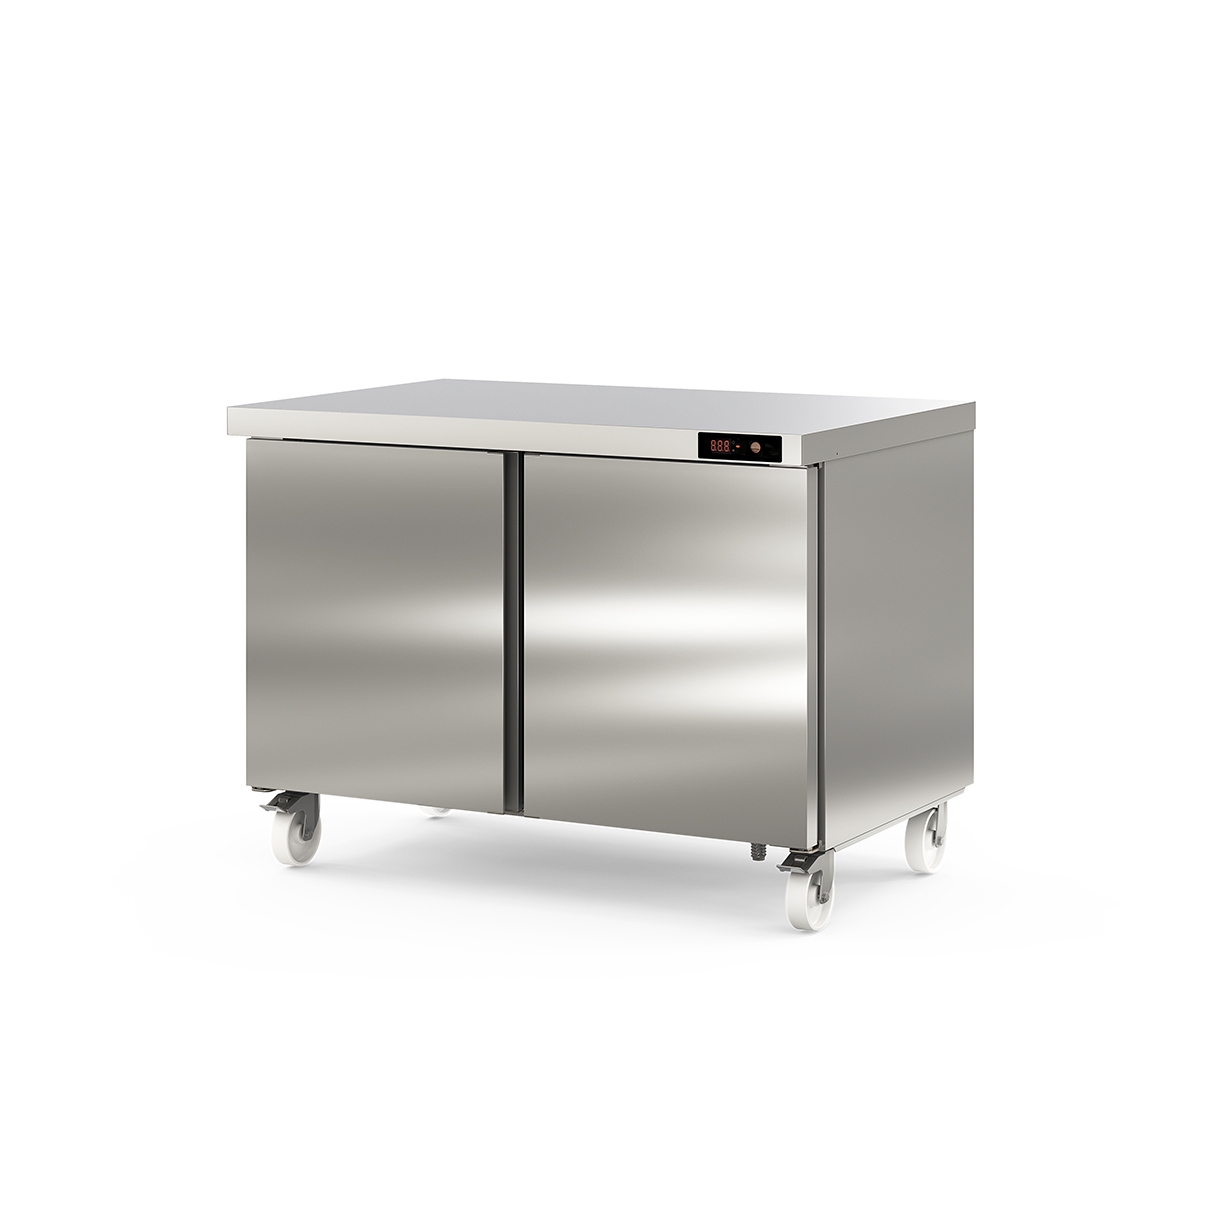 Refrigerated Table DSD